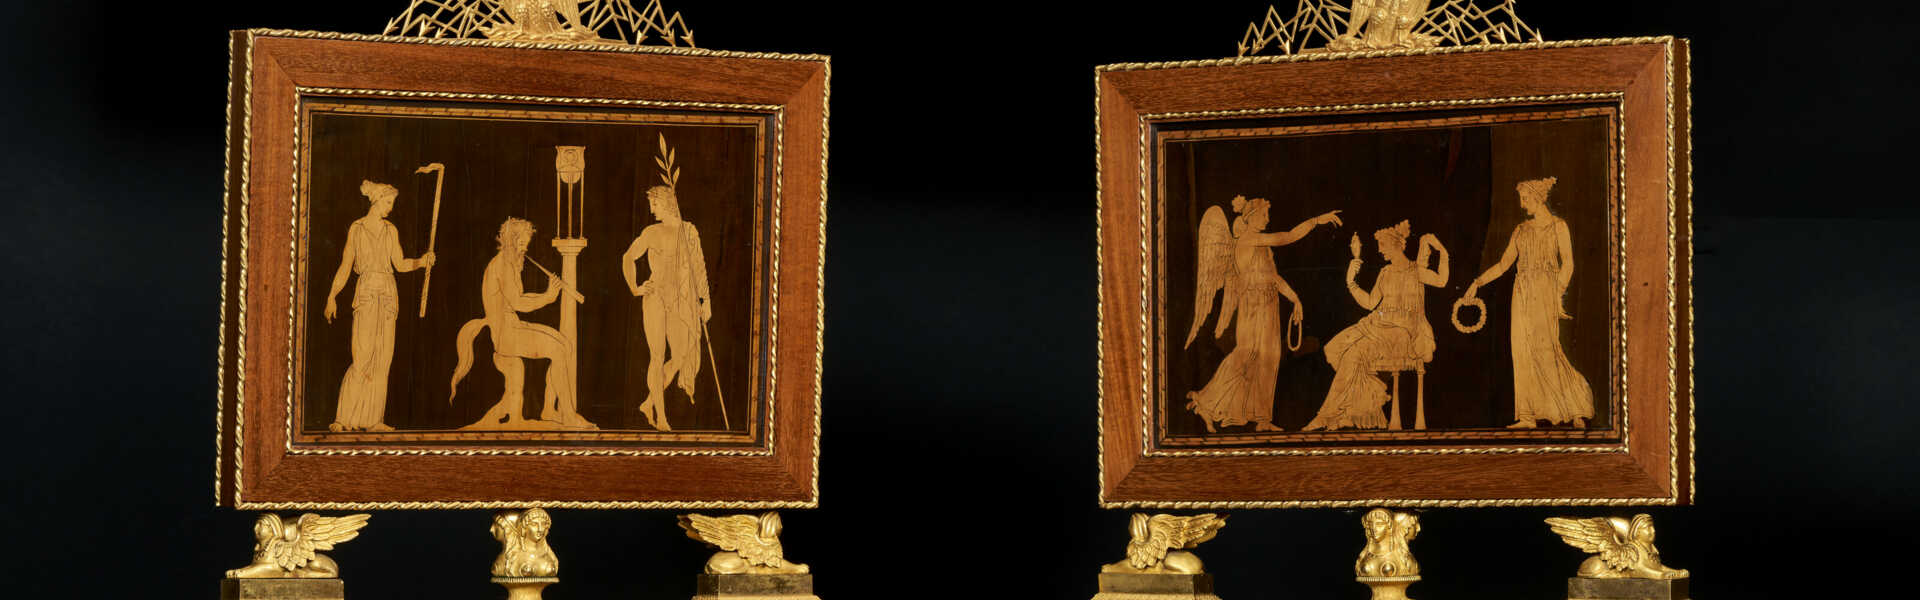 A PAIR OF ROYAL ITALIAN ORMOLU-MOUNTED AMARANTH, MARQUETRY AND WHITE MARBLE TABLE SCREENS